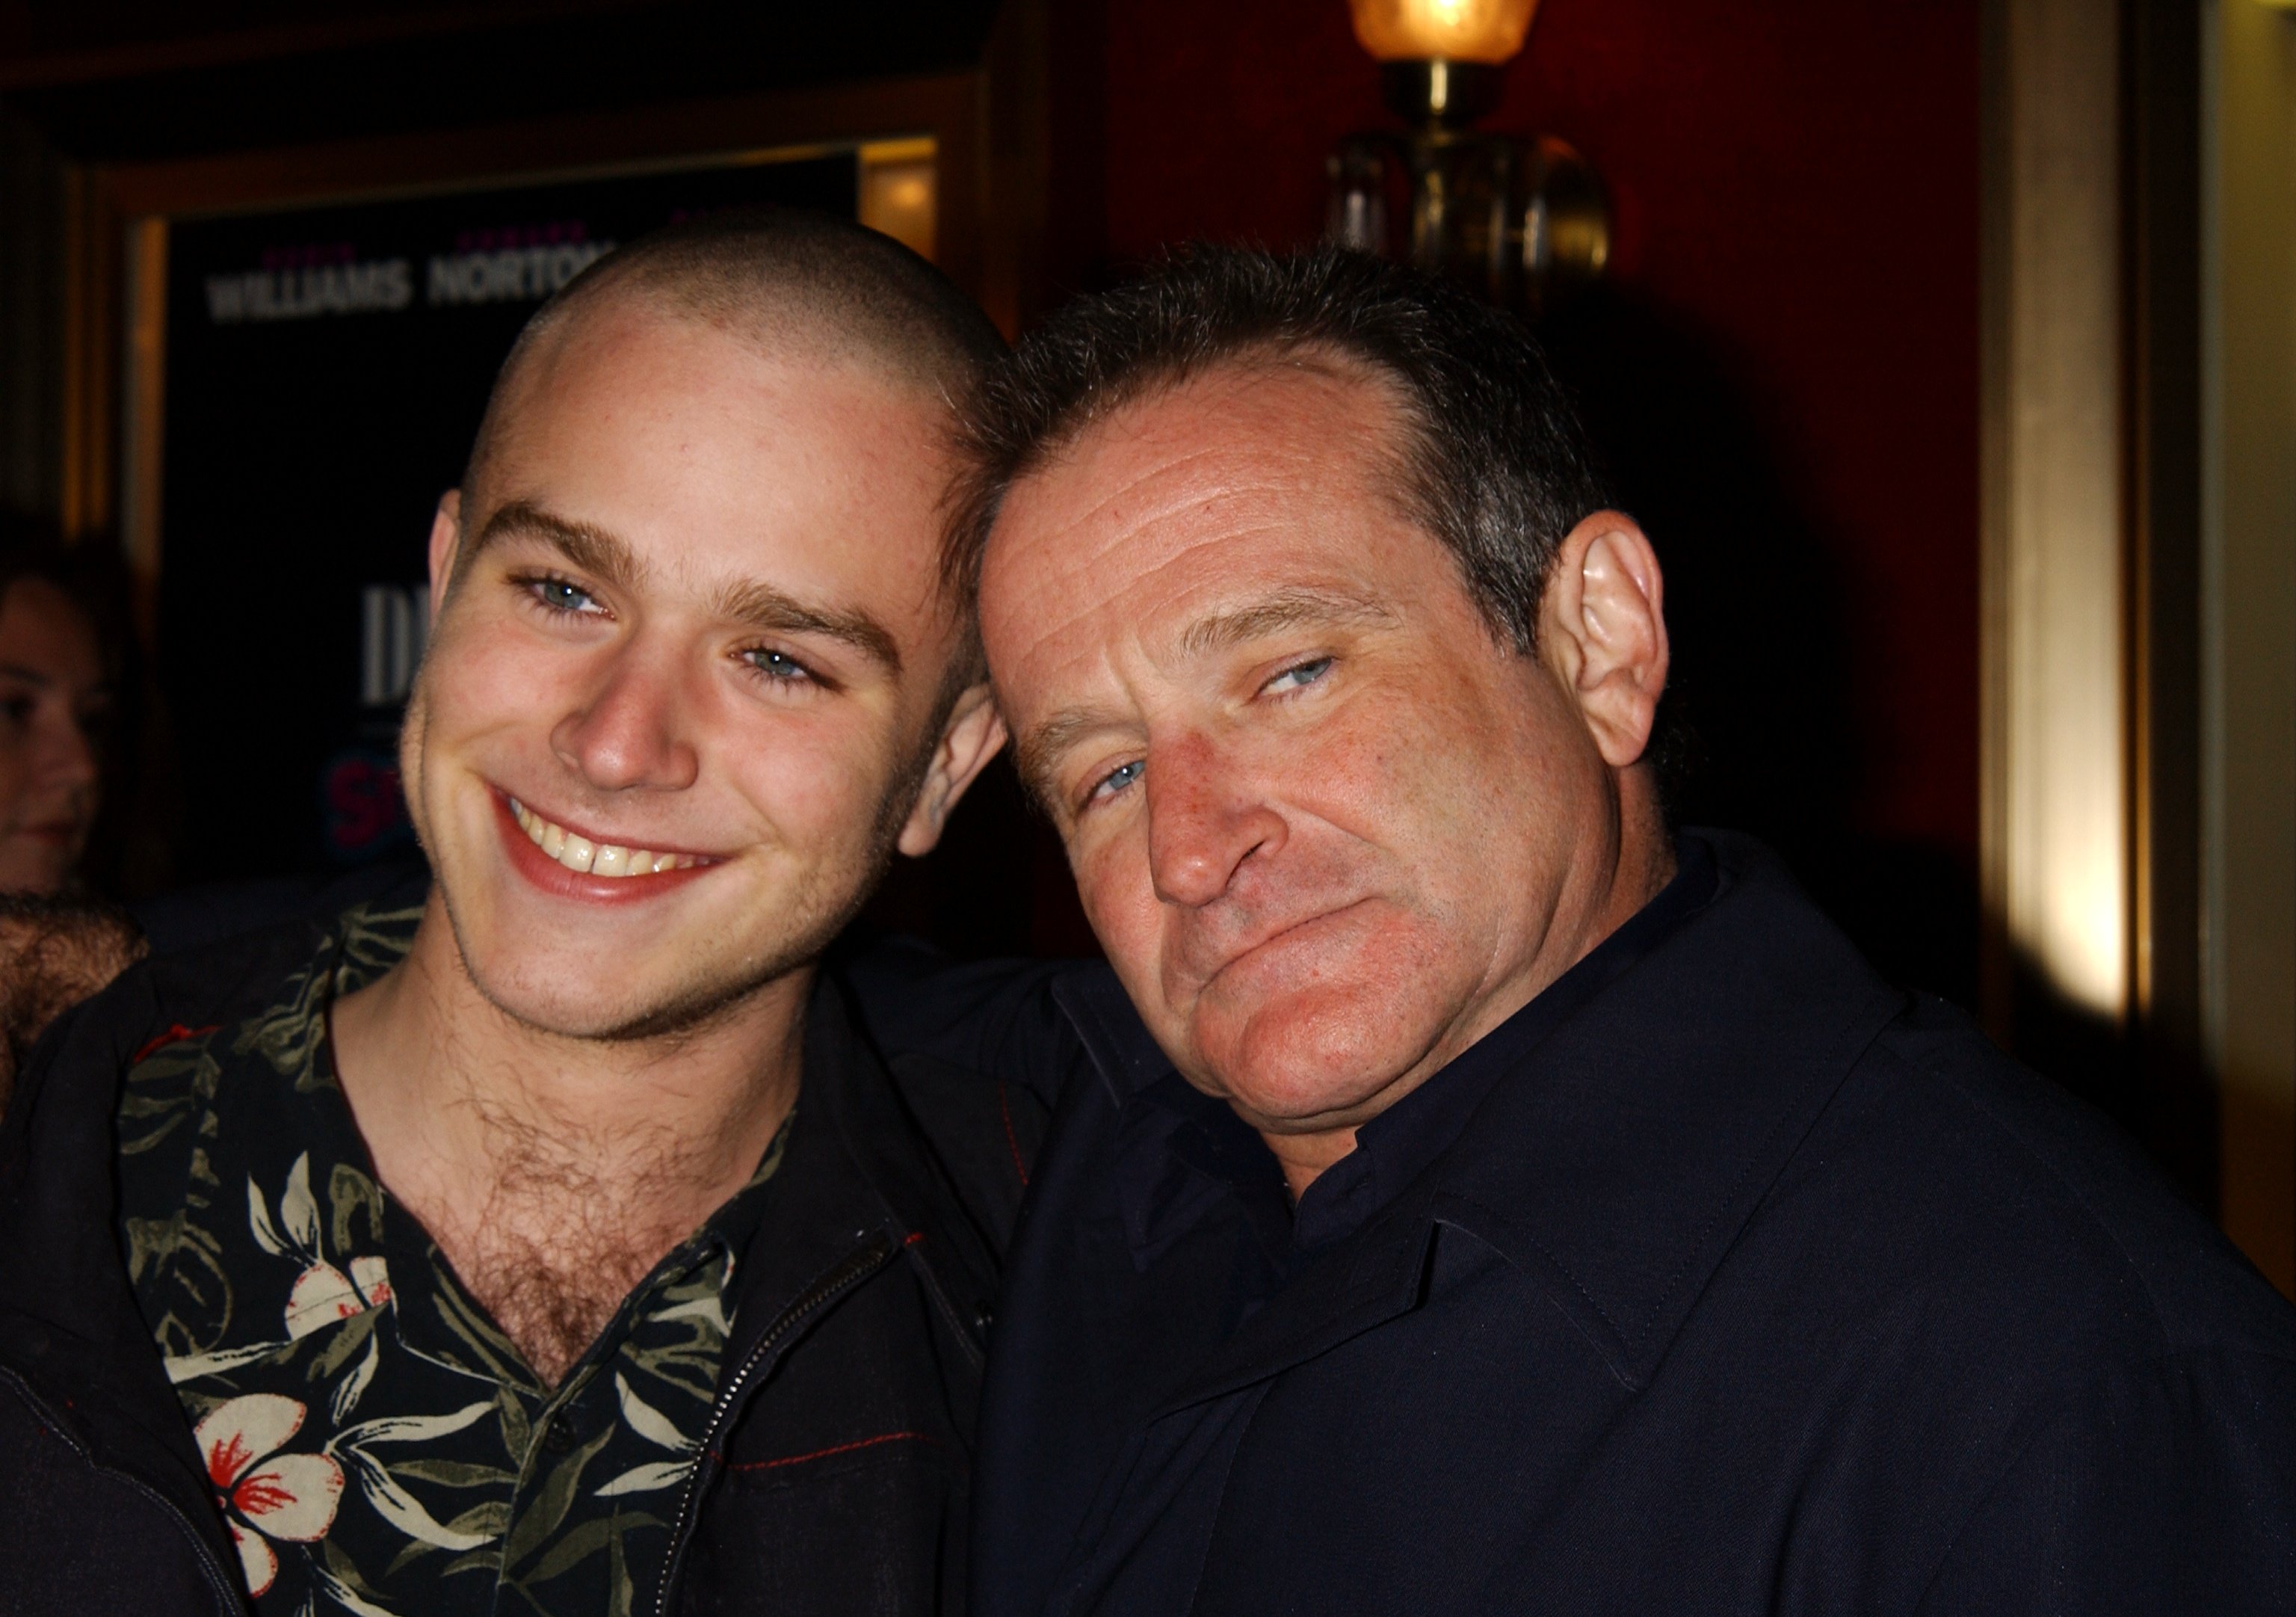 Zachary and Robin Williams at the premiere of "Death to Smoochy" on March 26, 2002 | Source: Getty Images